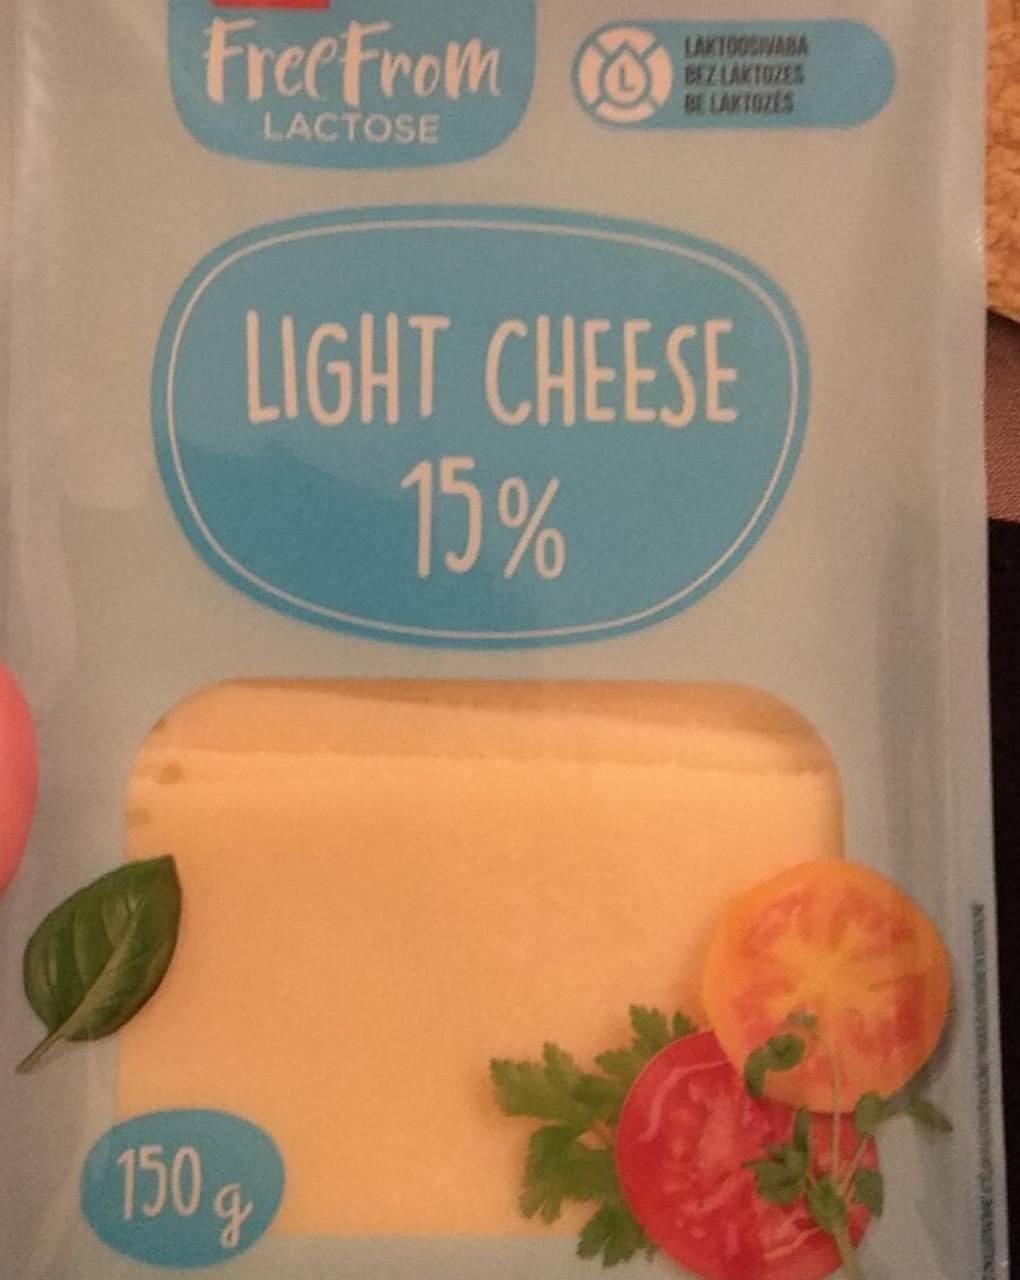 Fotografie - FreeFrom Lactose Light Cheese 15% Rimi